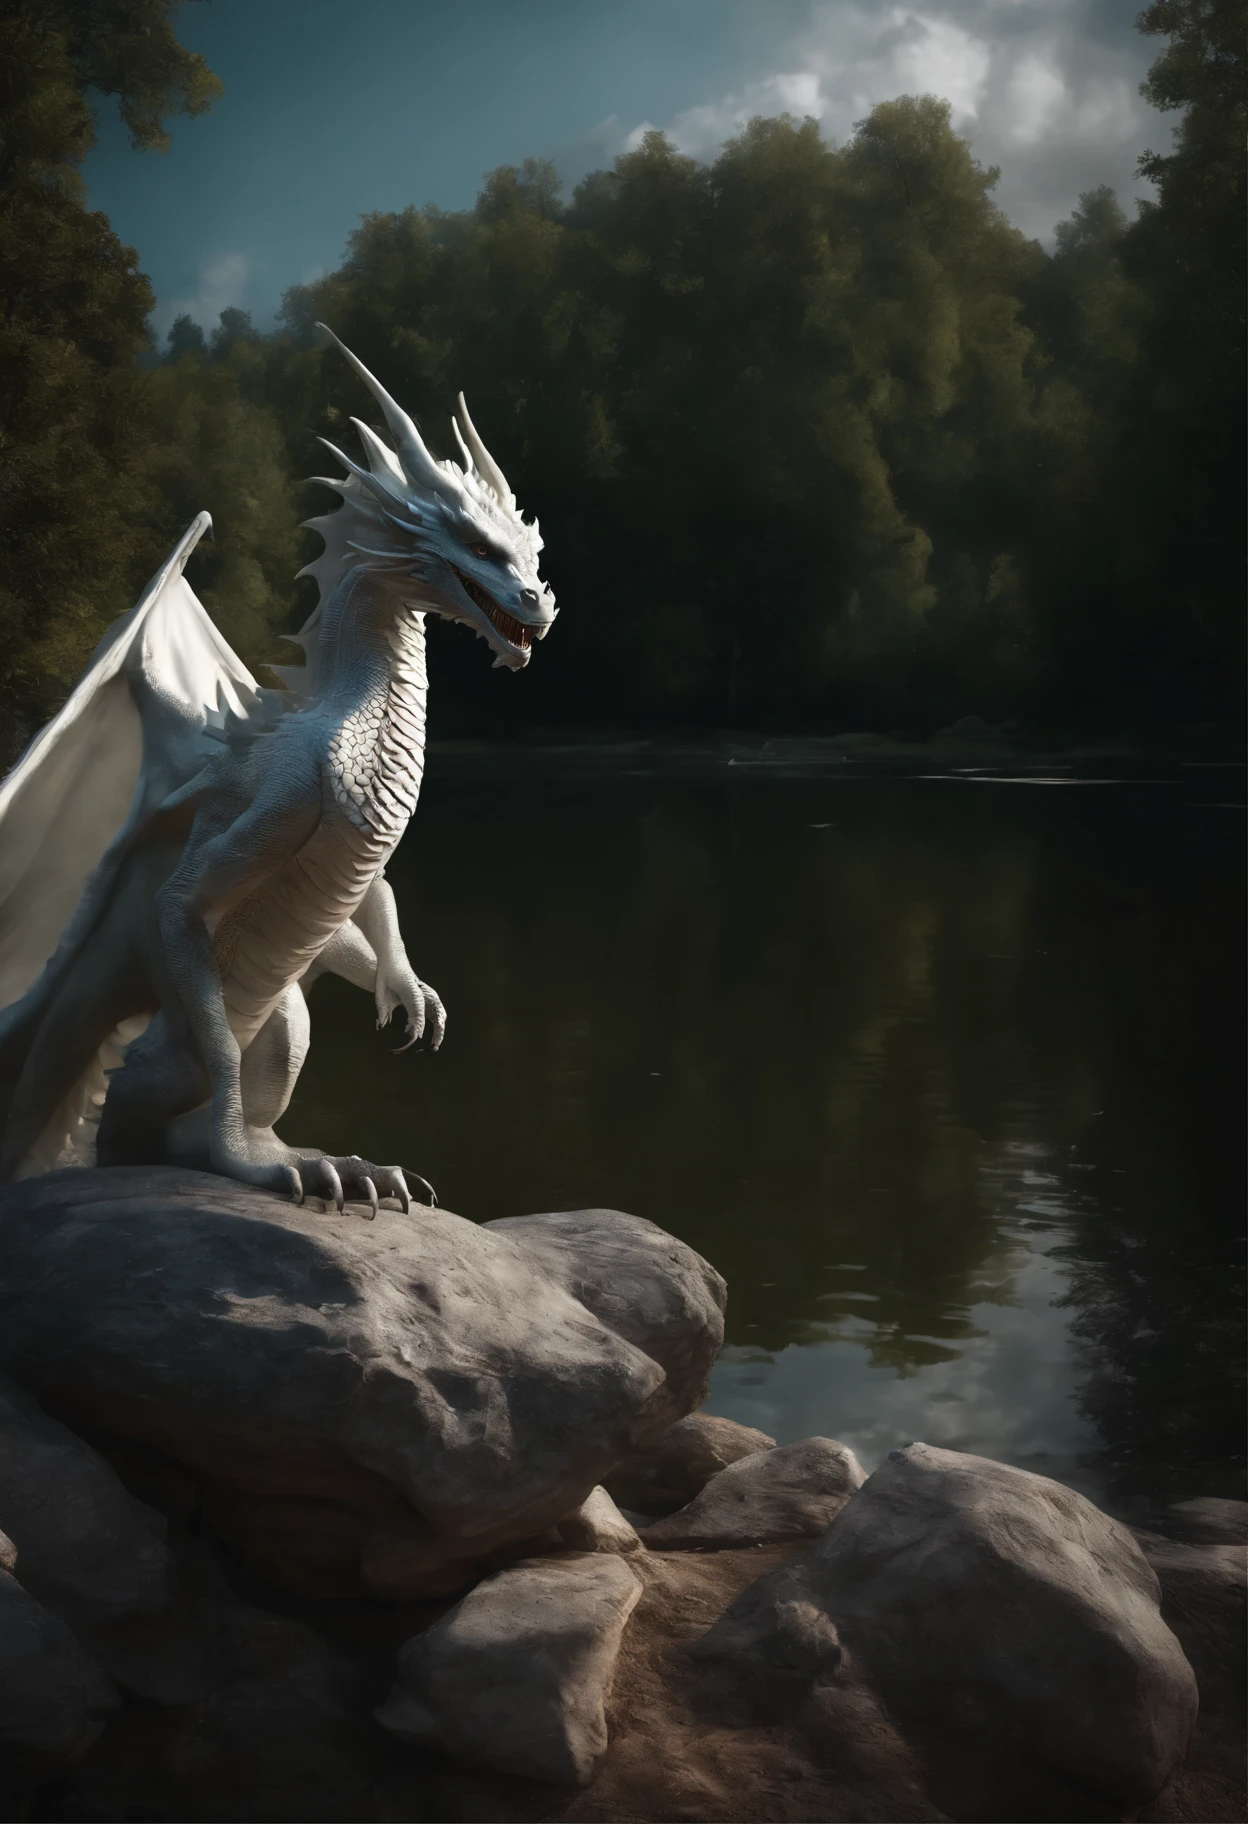 Masterpiece,4k realism, ((((1white dragon, lake and water, Best quality, Masterpiece, Ultra-high resolution, (photograph realistic:1.4), surrealism, Dream-like,fusionart, Shadowdancer, shadow magic, darkness control, stealth, shadowstep, umbral spells, hidden blade,,)),,), digital art, hyper-realistic 8K